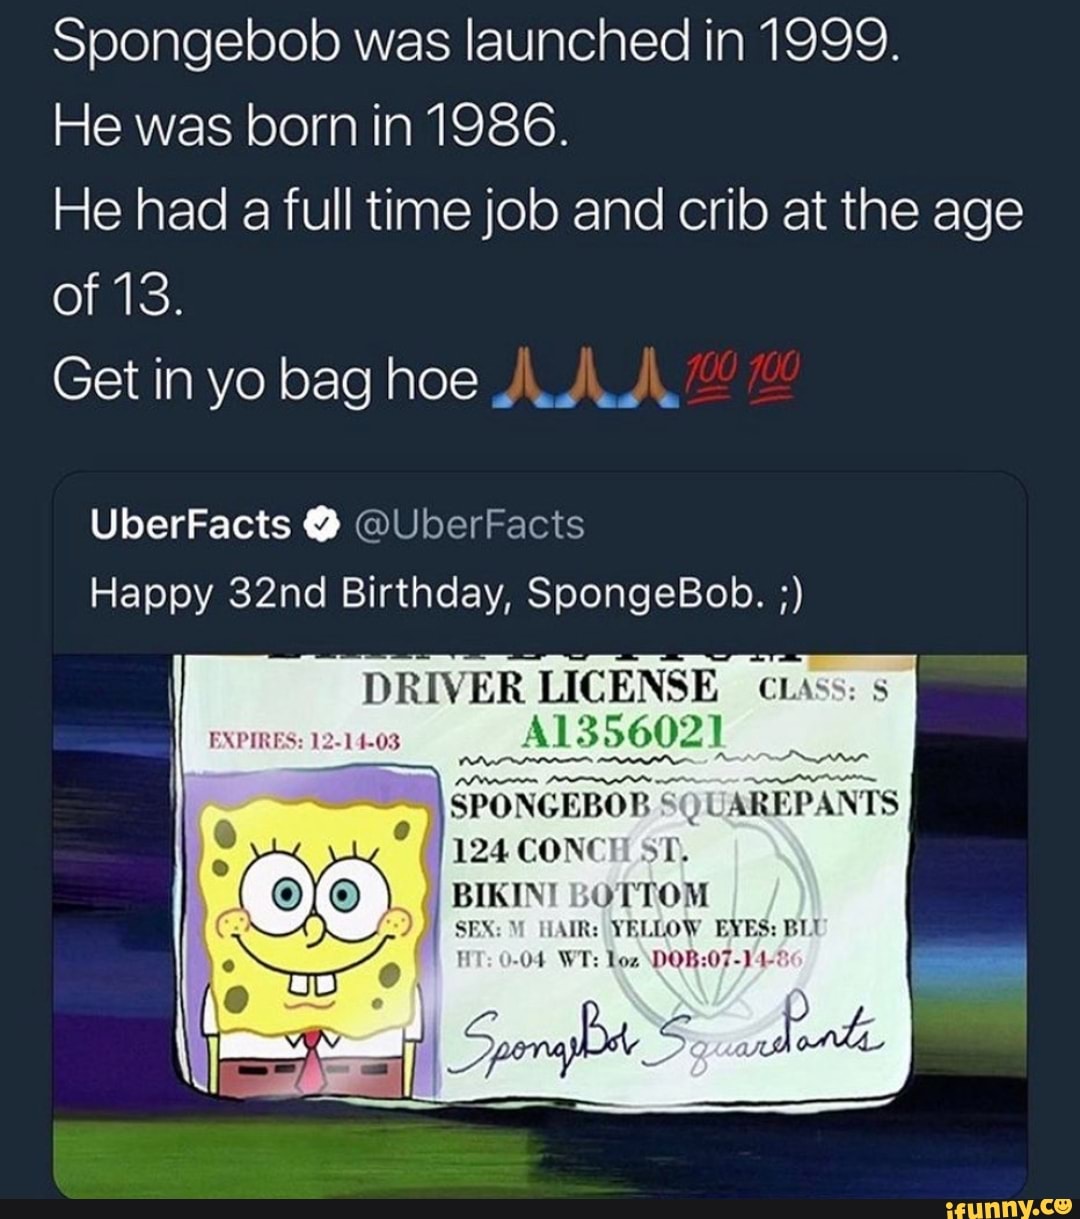 Spongebob Was Launched In 1999 He Was Born In 1986 He Had A Full